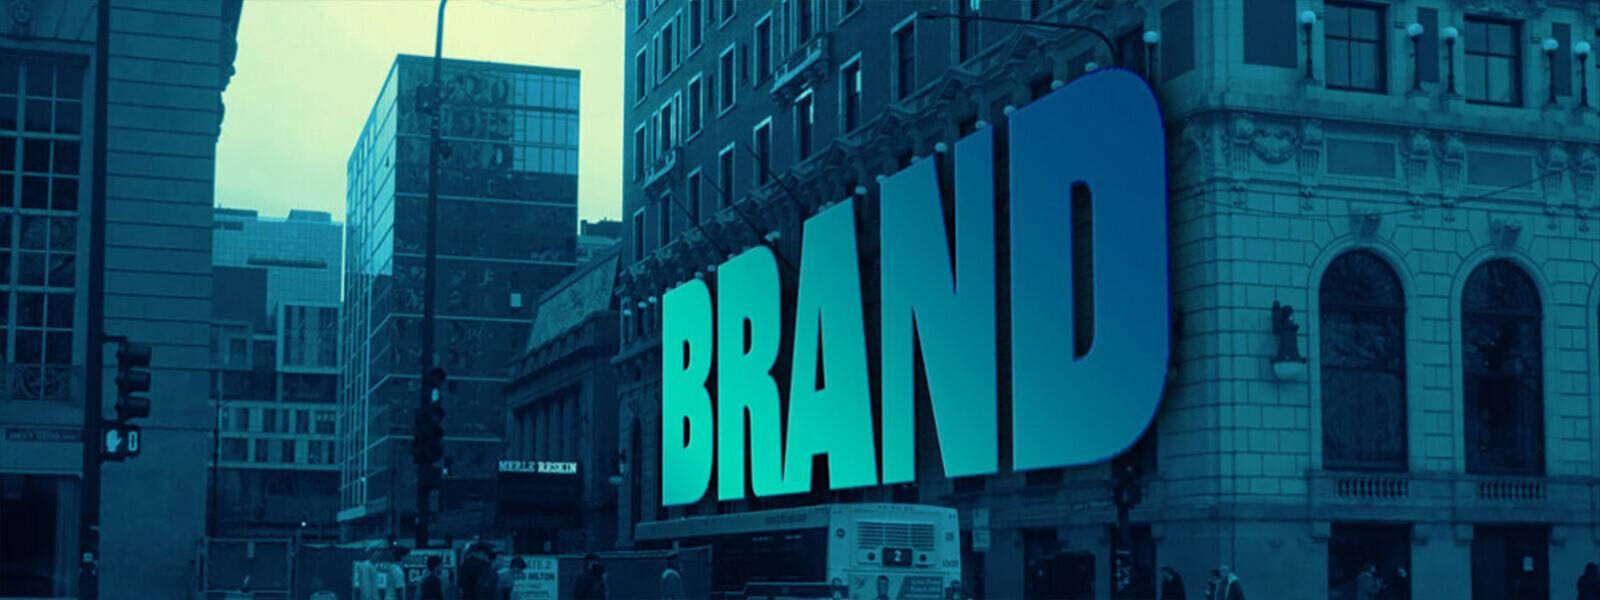 Brand Strategy 101: Why Brands Today Must Awaken Customers to Accelerate Growth